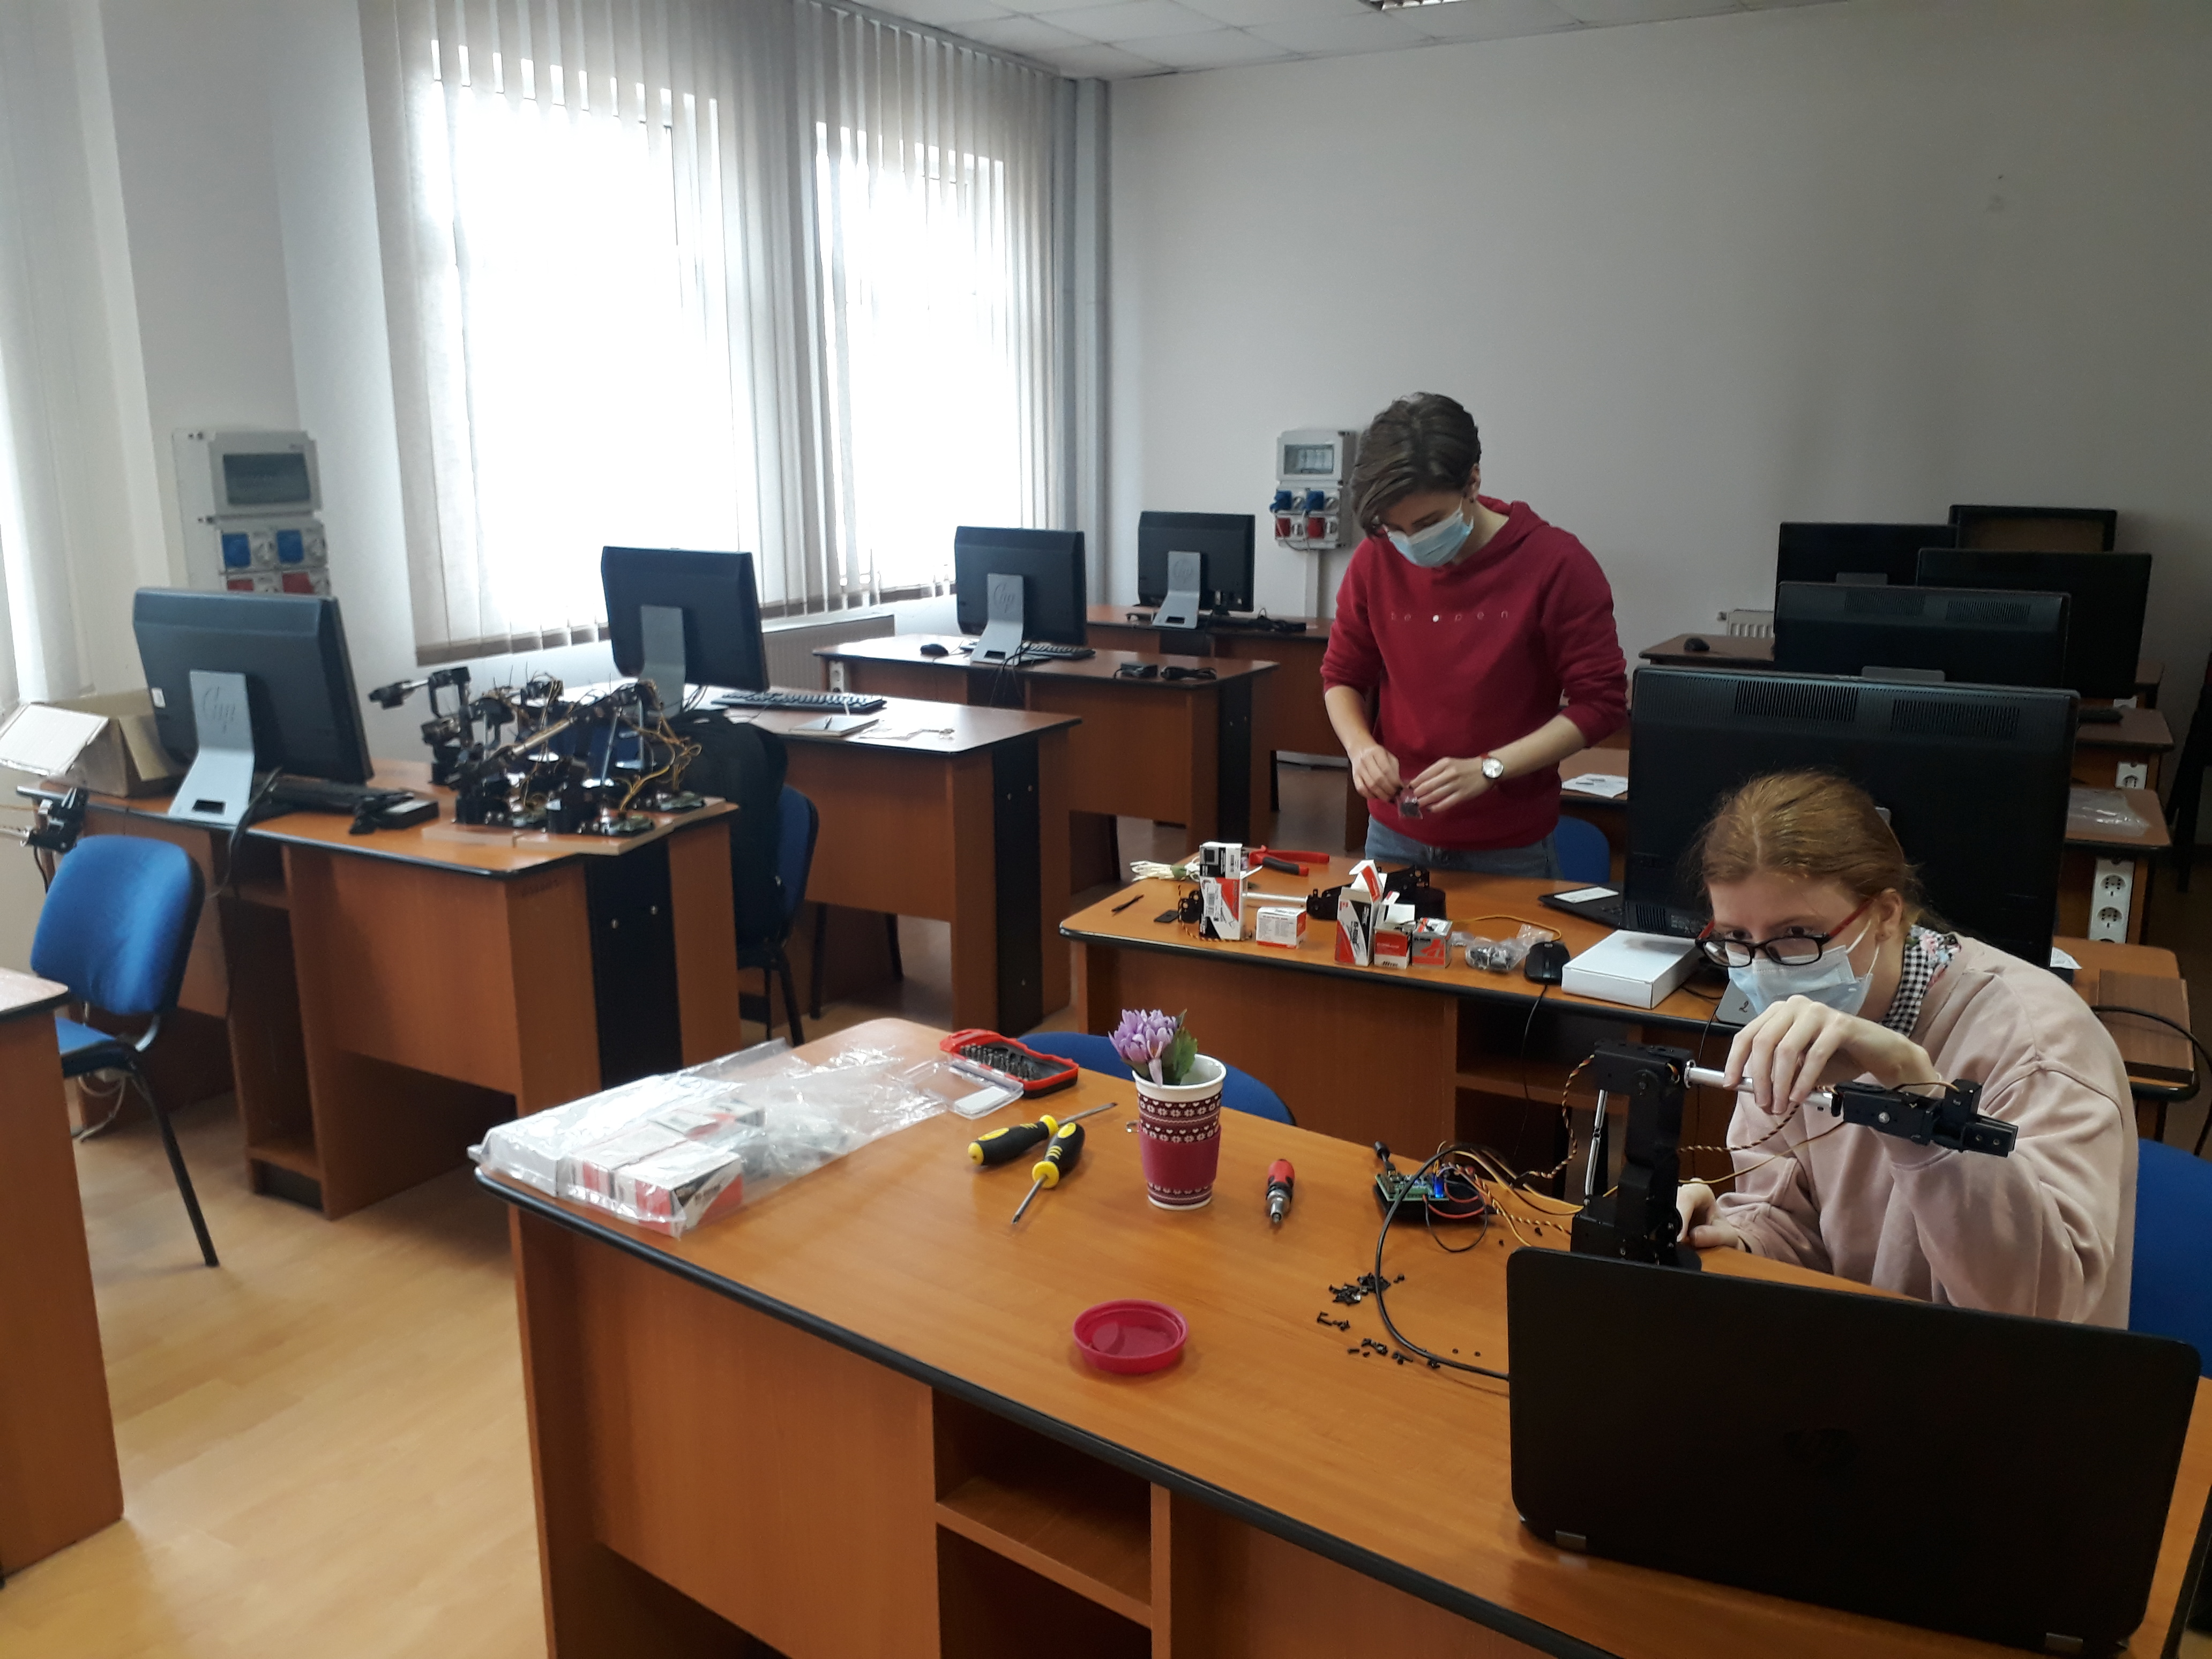 Ioana and Anna helping with the assemblying of the robots